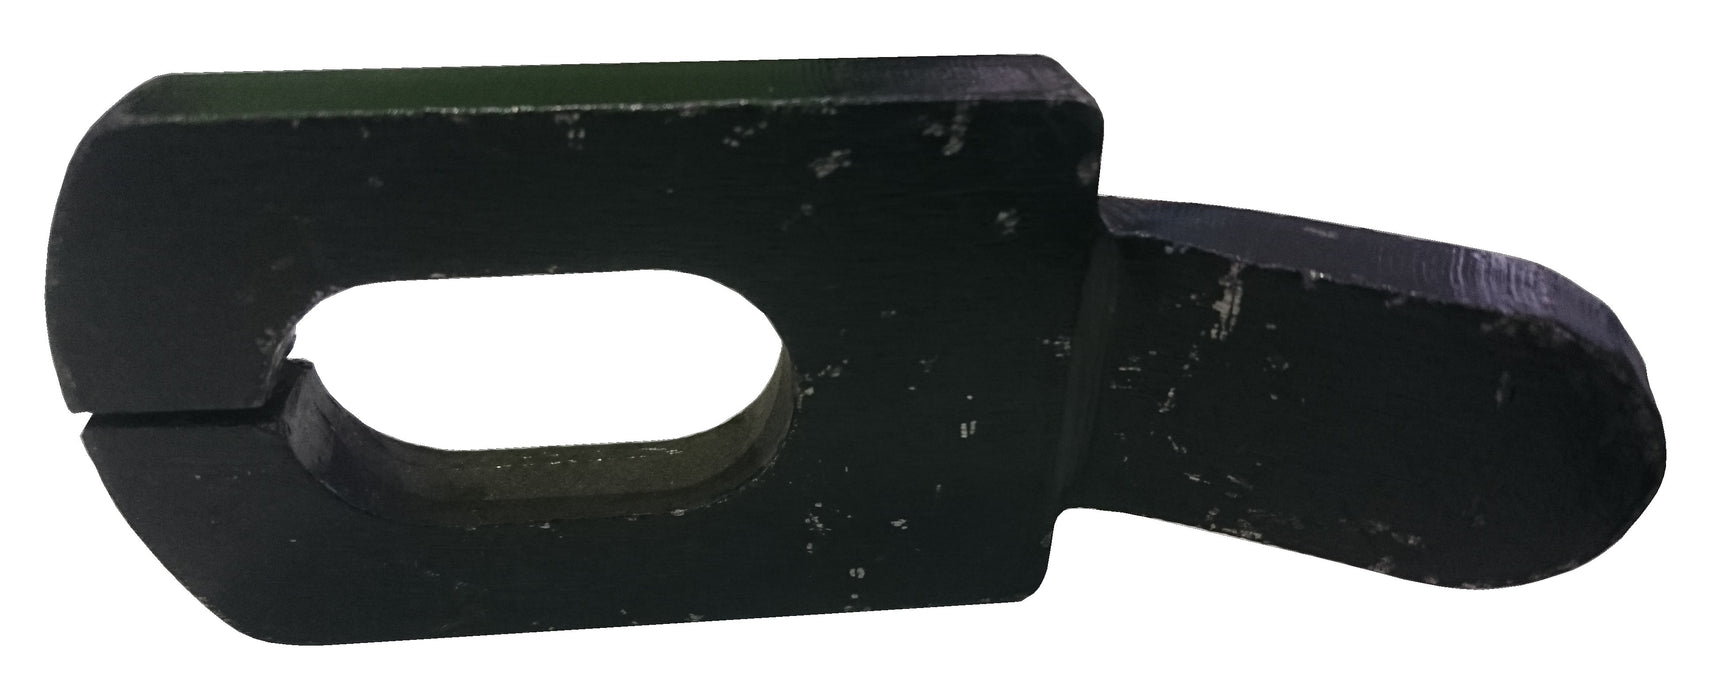 SPACER PLATE for the #Econo SPRING JUMP - TURTLE NECK